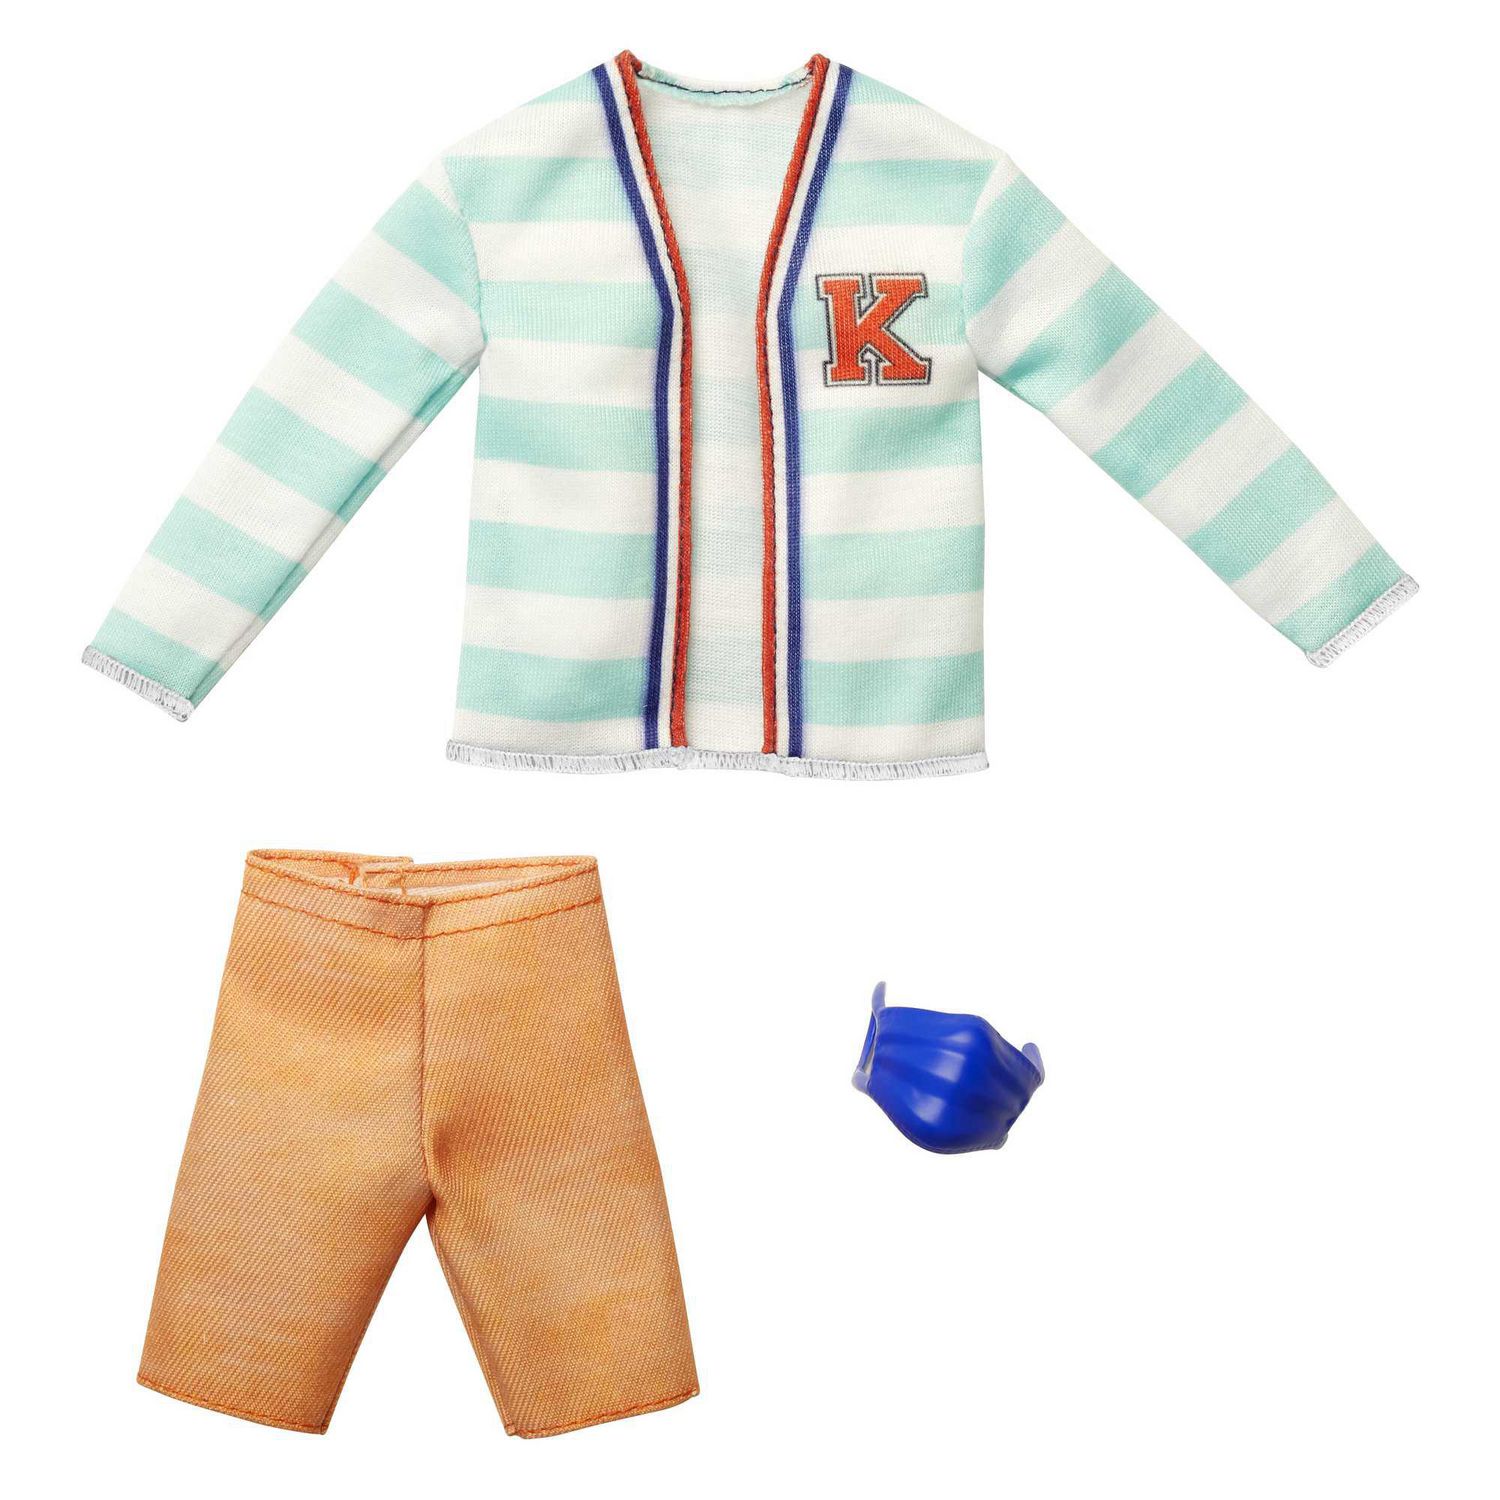 Barbie Fashions Pack: Ken Doll Clothes with Striped Sweater with a